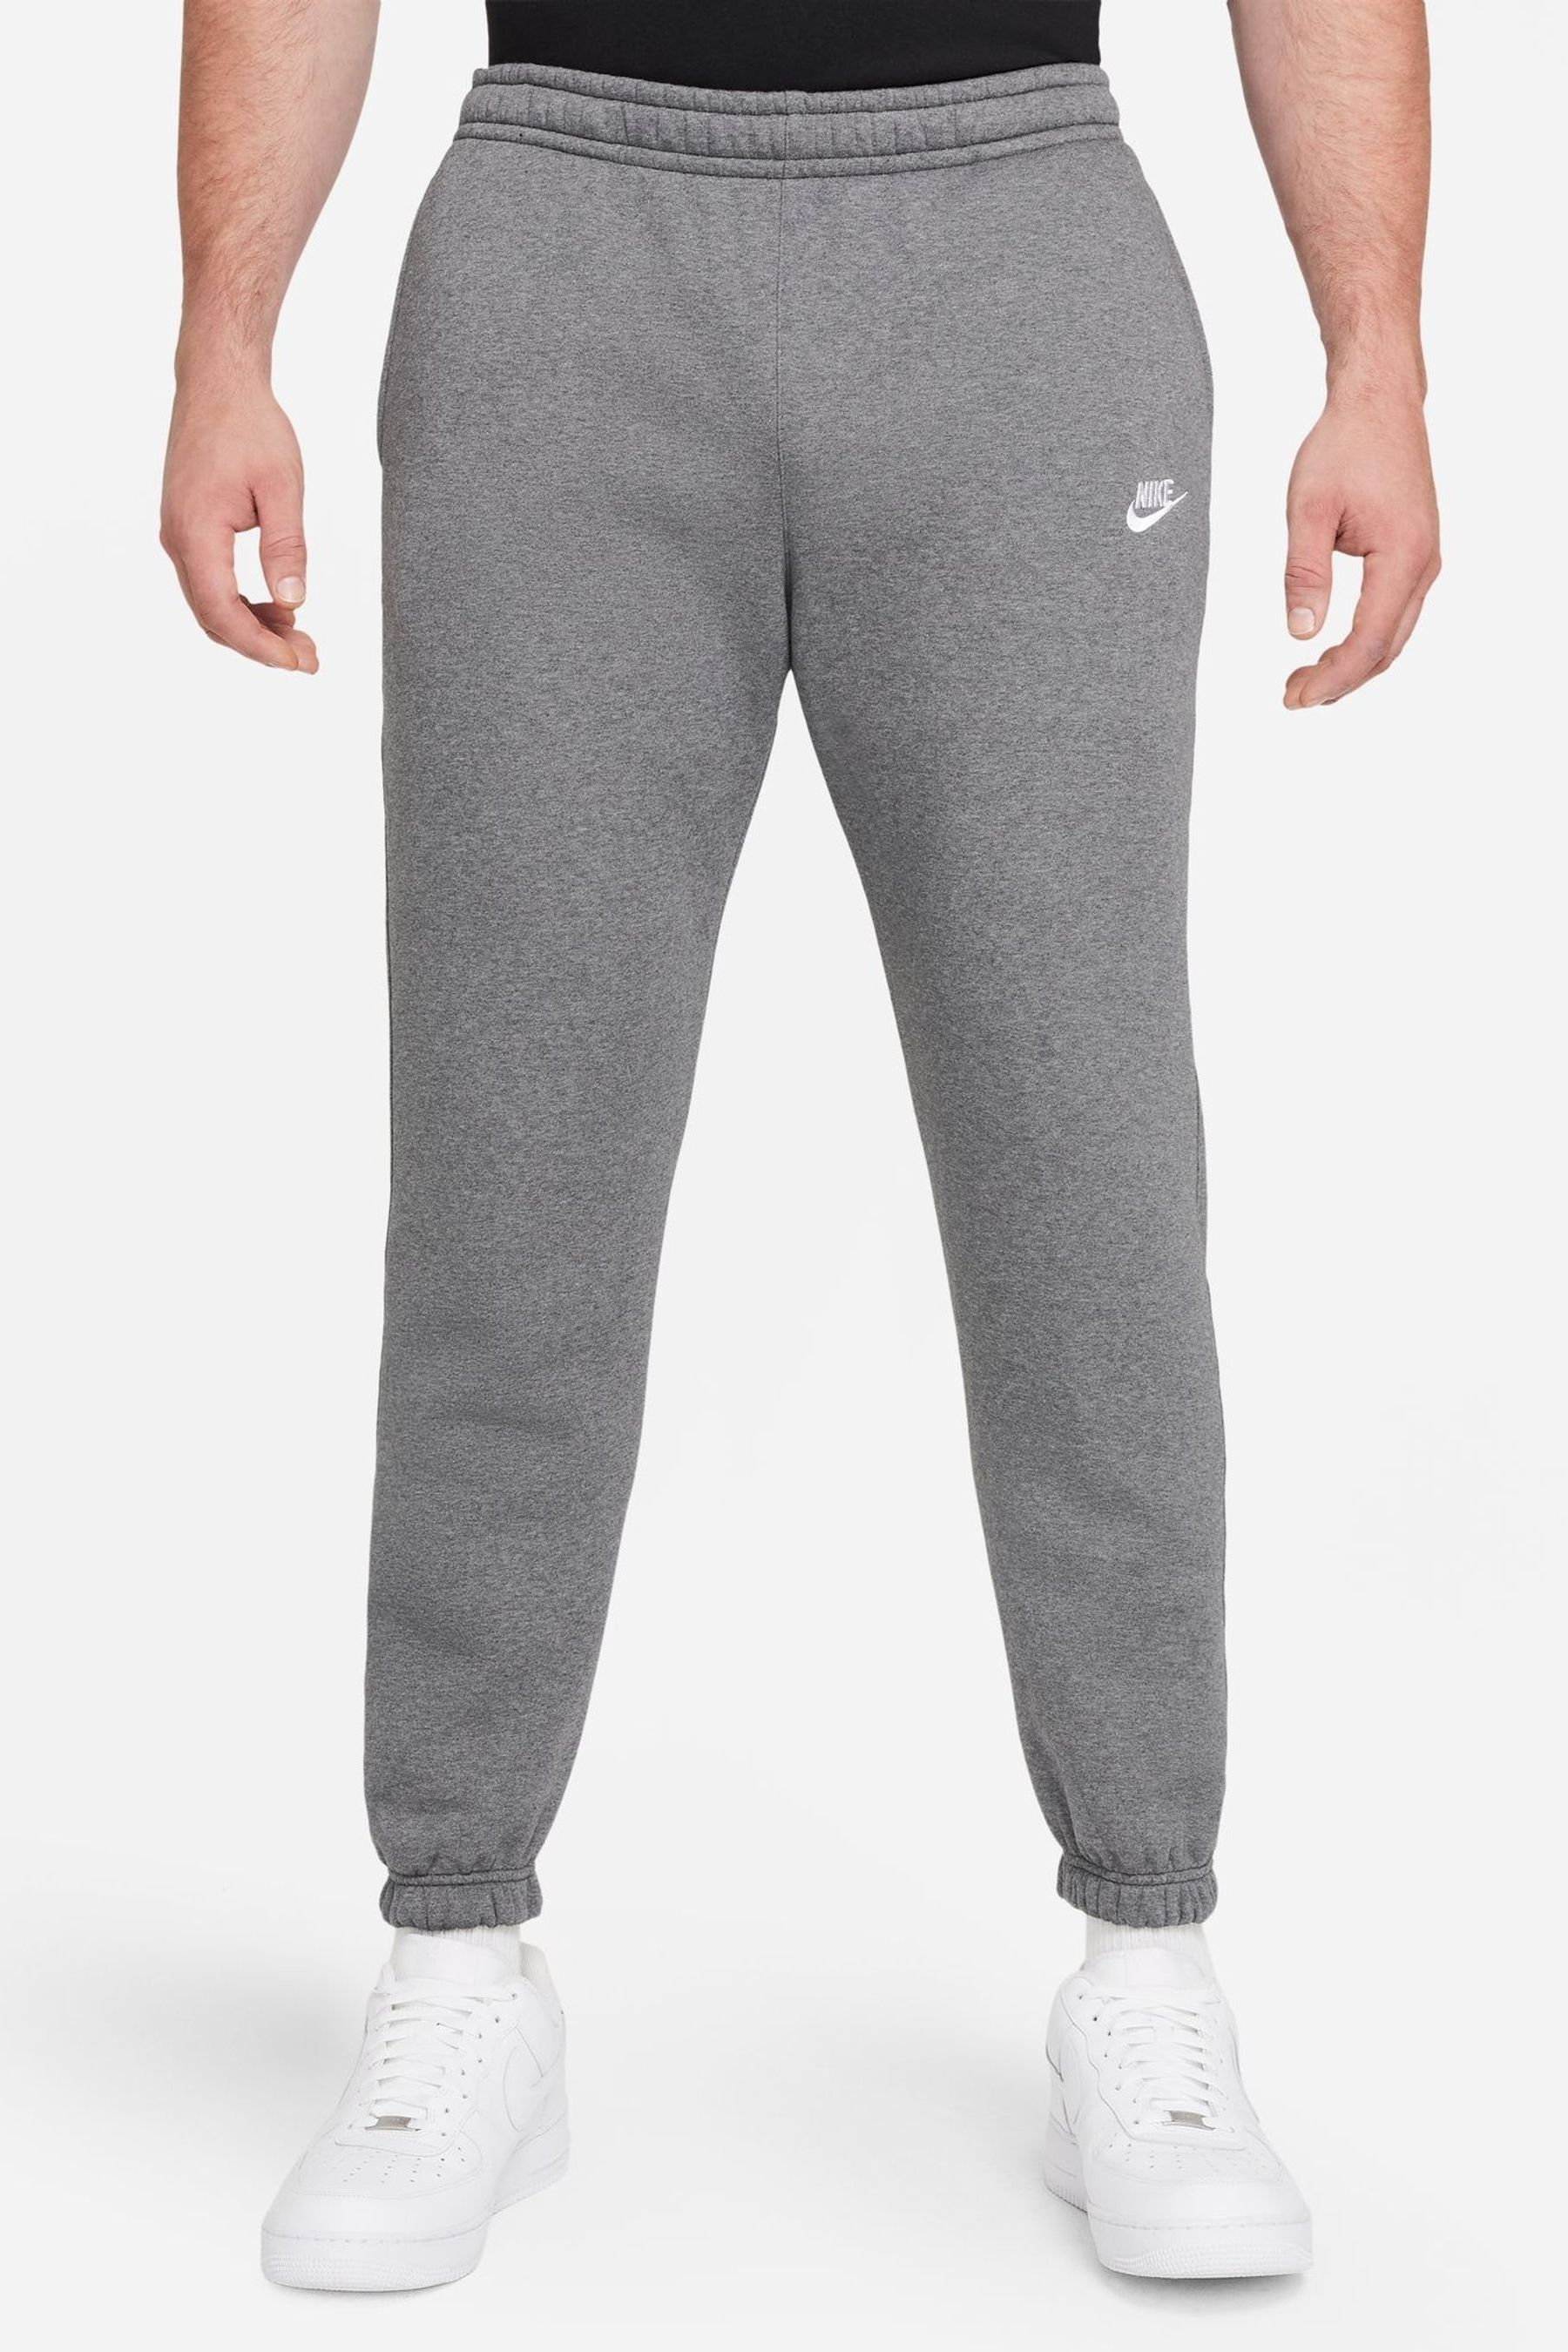 Buy Nike Club Cuffed Joggers from the Next UK online shop